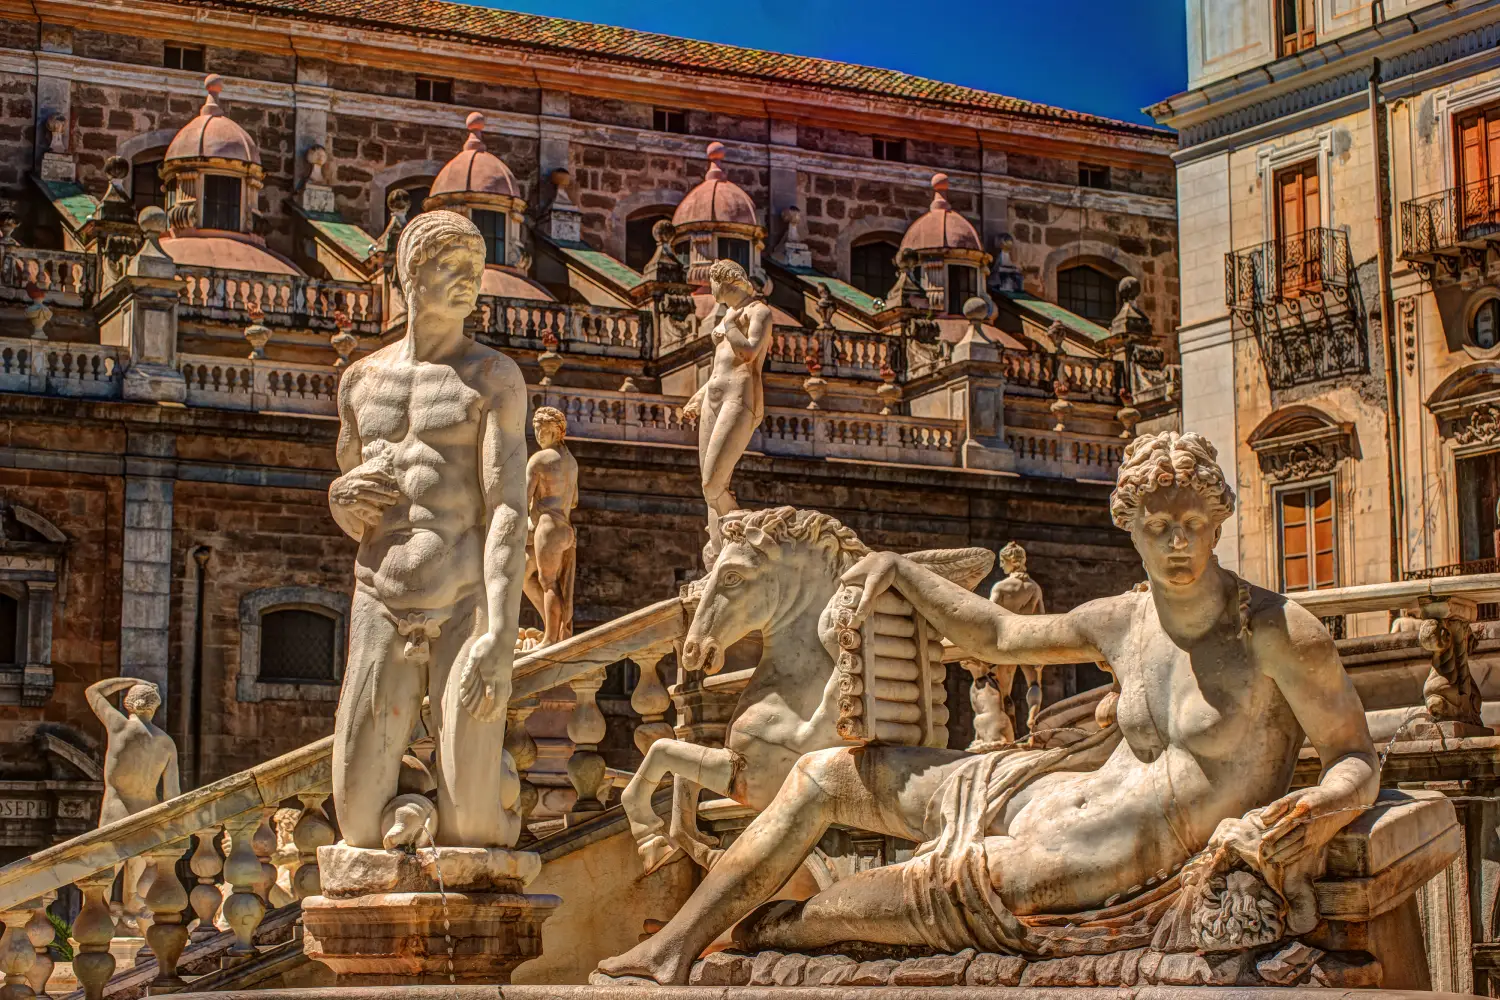 Ferry to Palermo - Beautiful sculpture of the famous fountain of shame on baroque Piazza Pretoria, Palermo, Sicily, Italy.